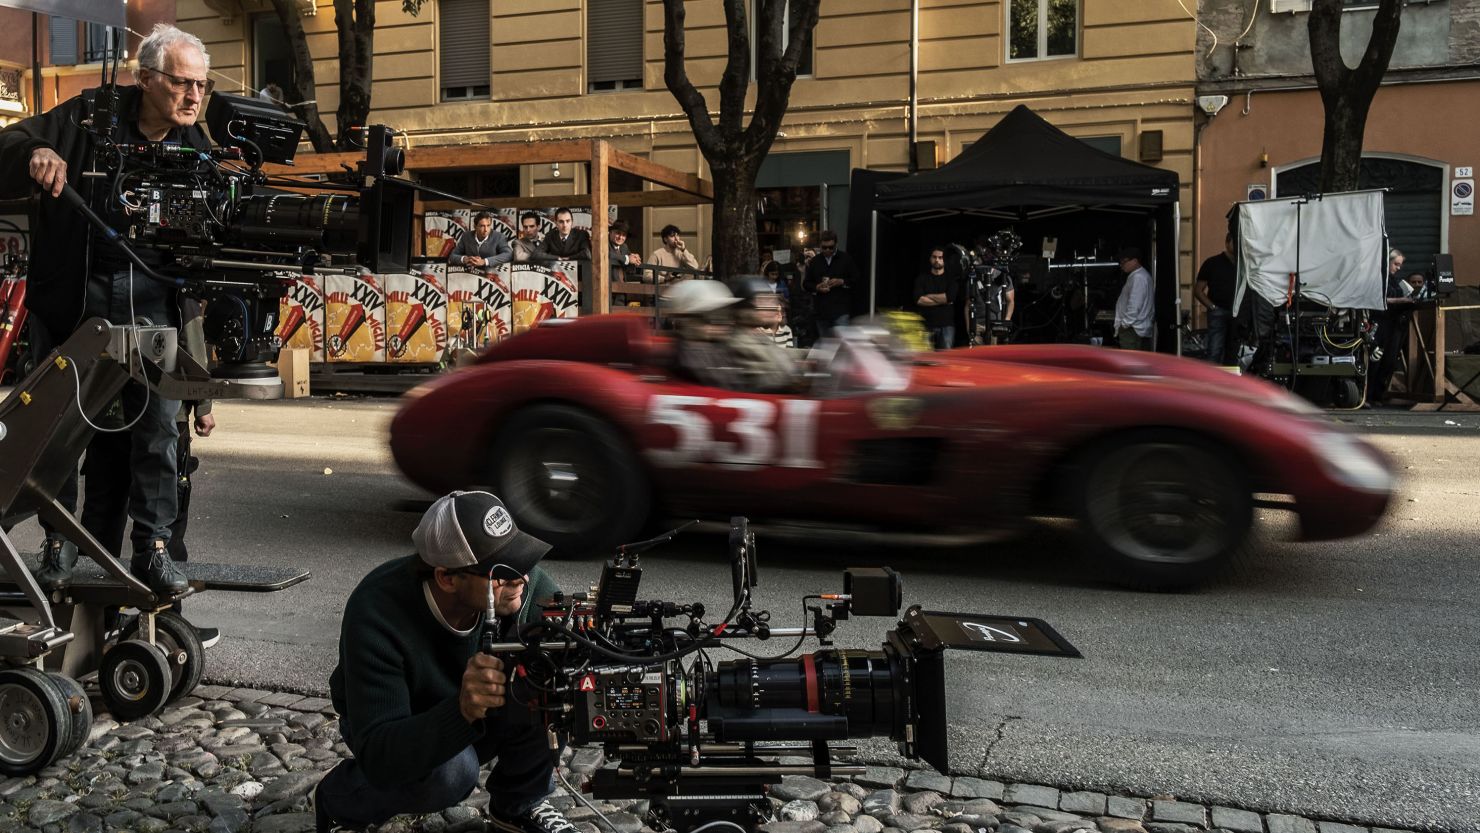 Michael Mann (left) directs a racing sequence on location in Modena, Italy during the production of "Ferrari."